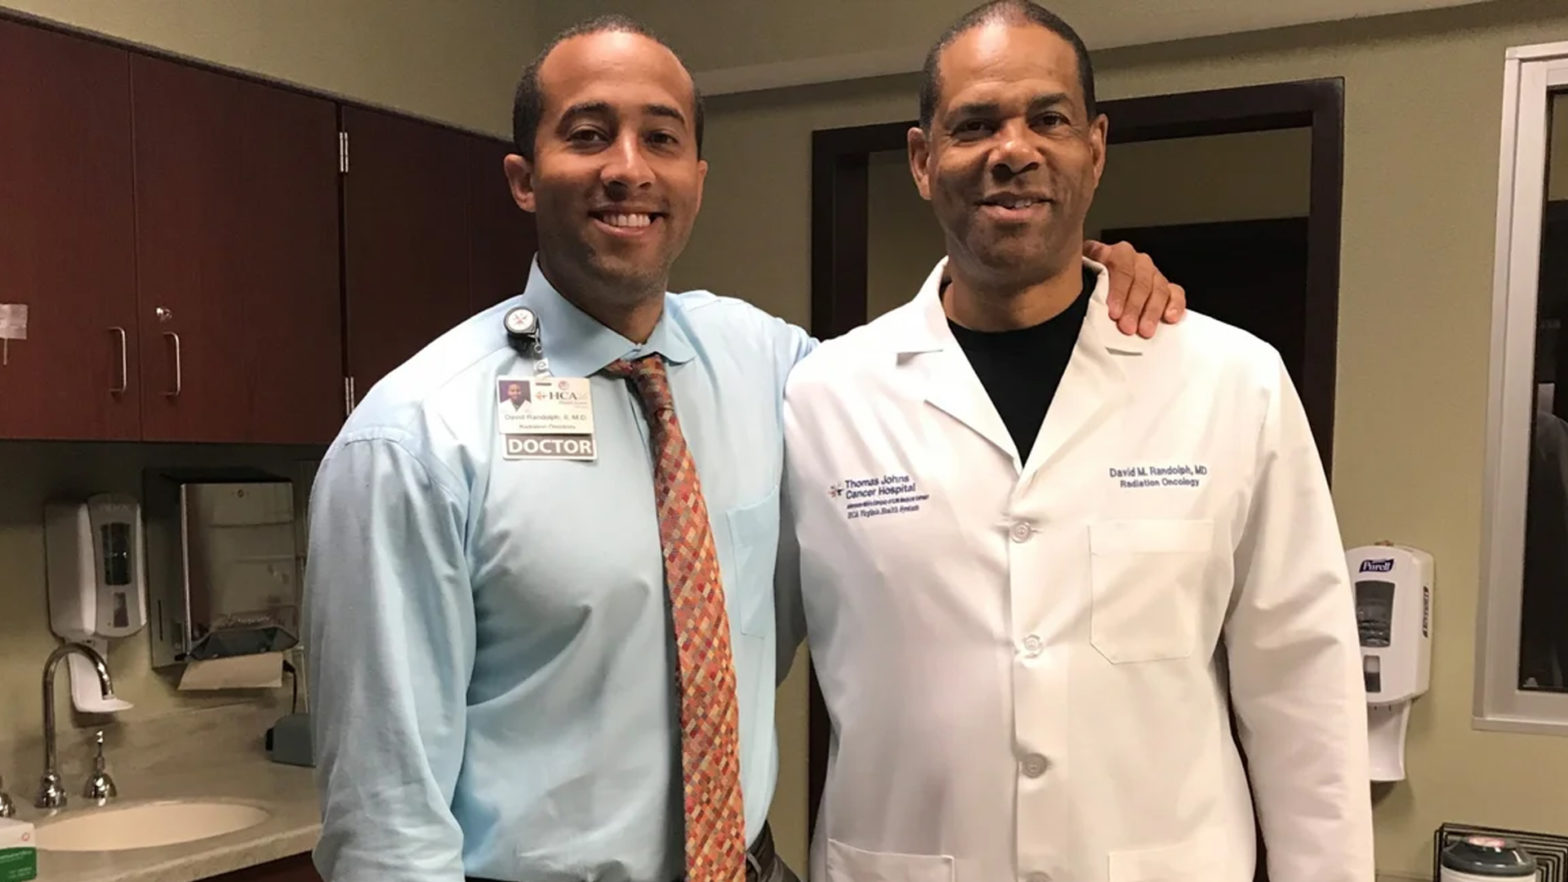 Meet The Father-Son Doctor Duo Working To Fight Cancer And Help Marginalized Communities